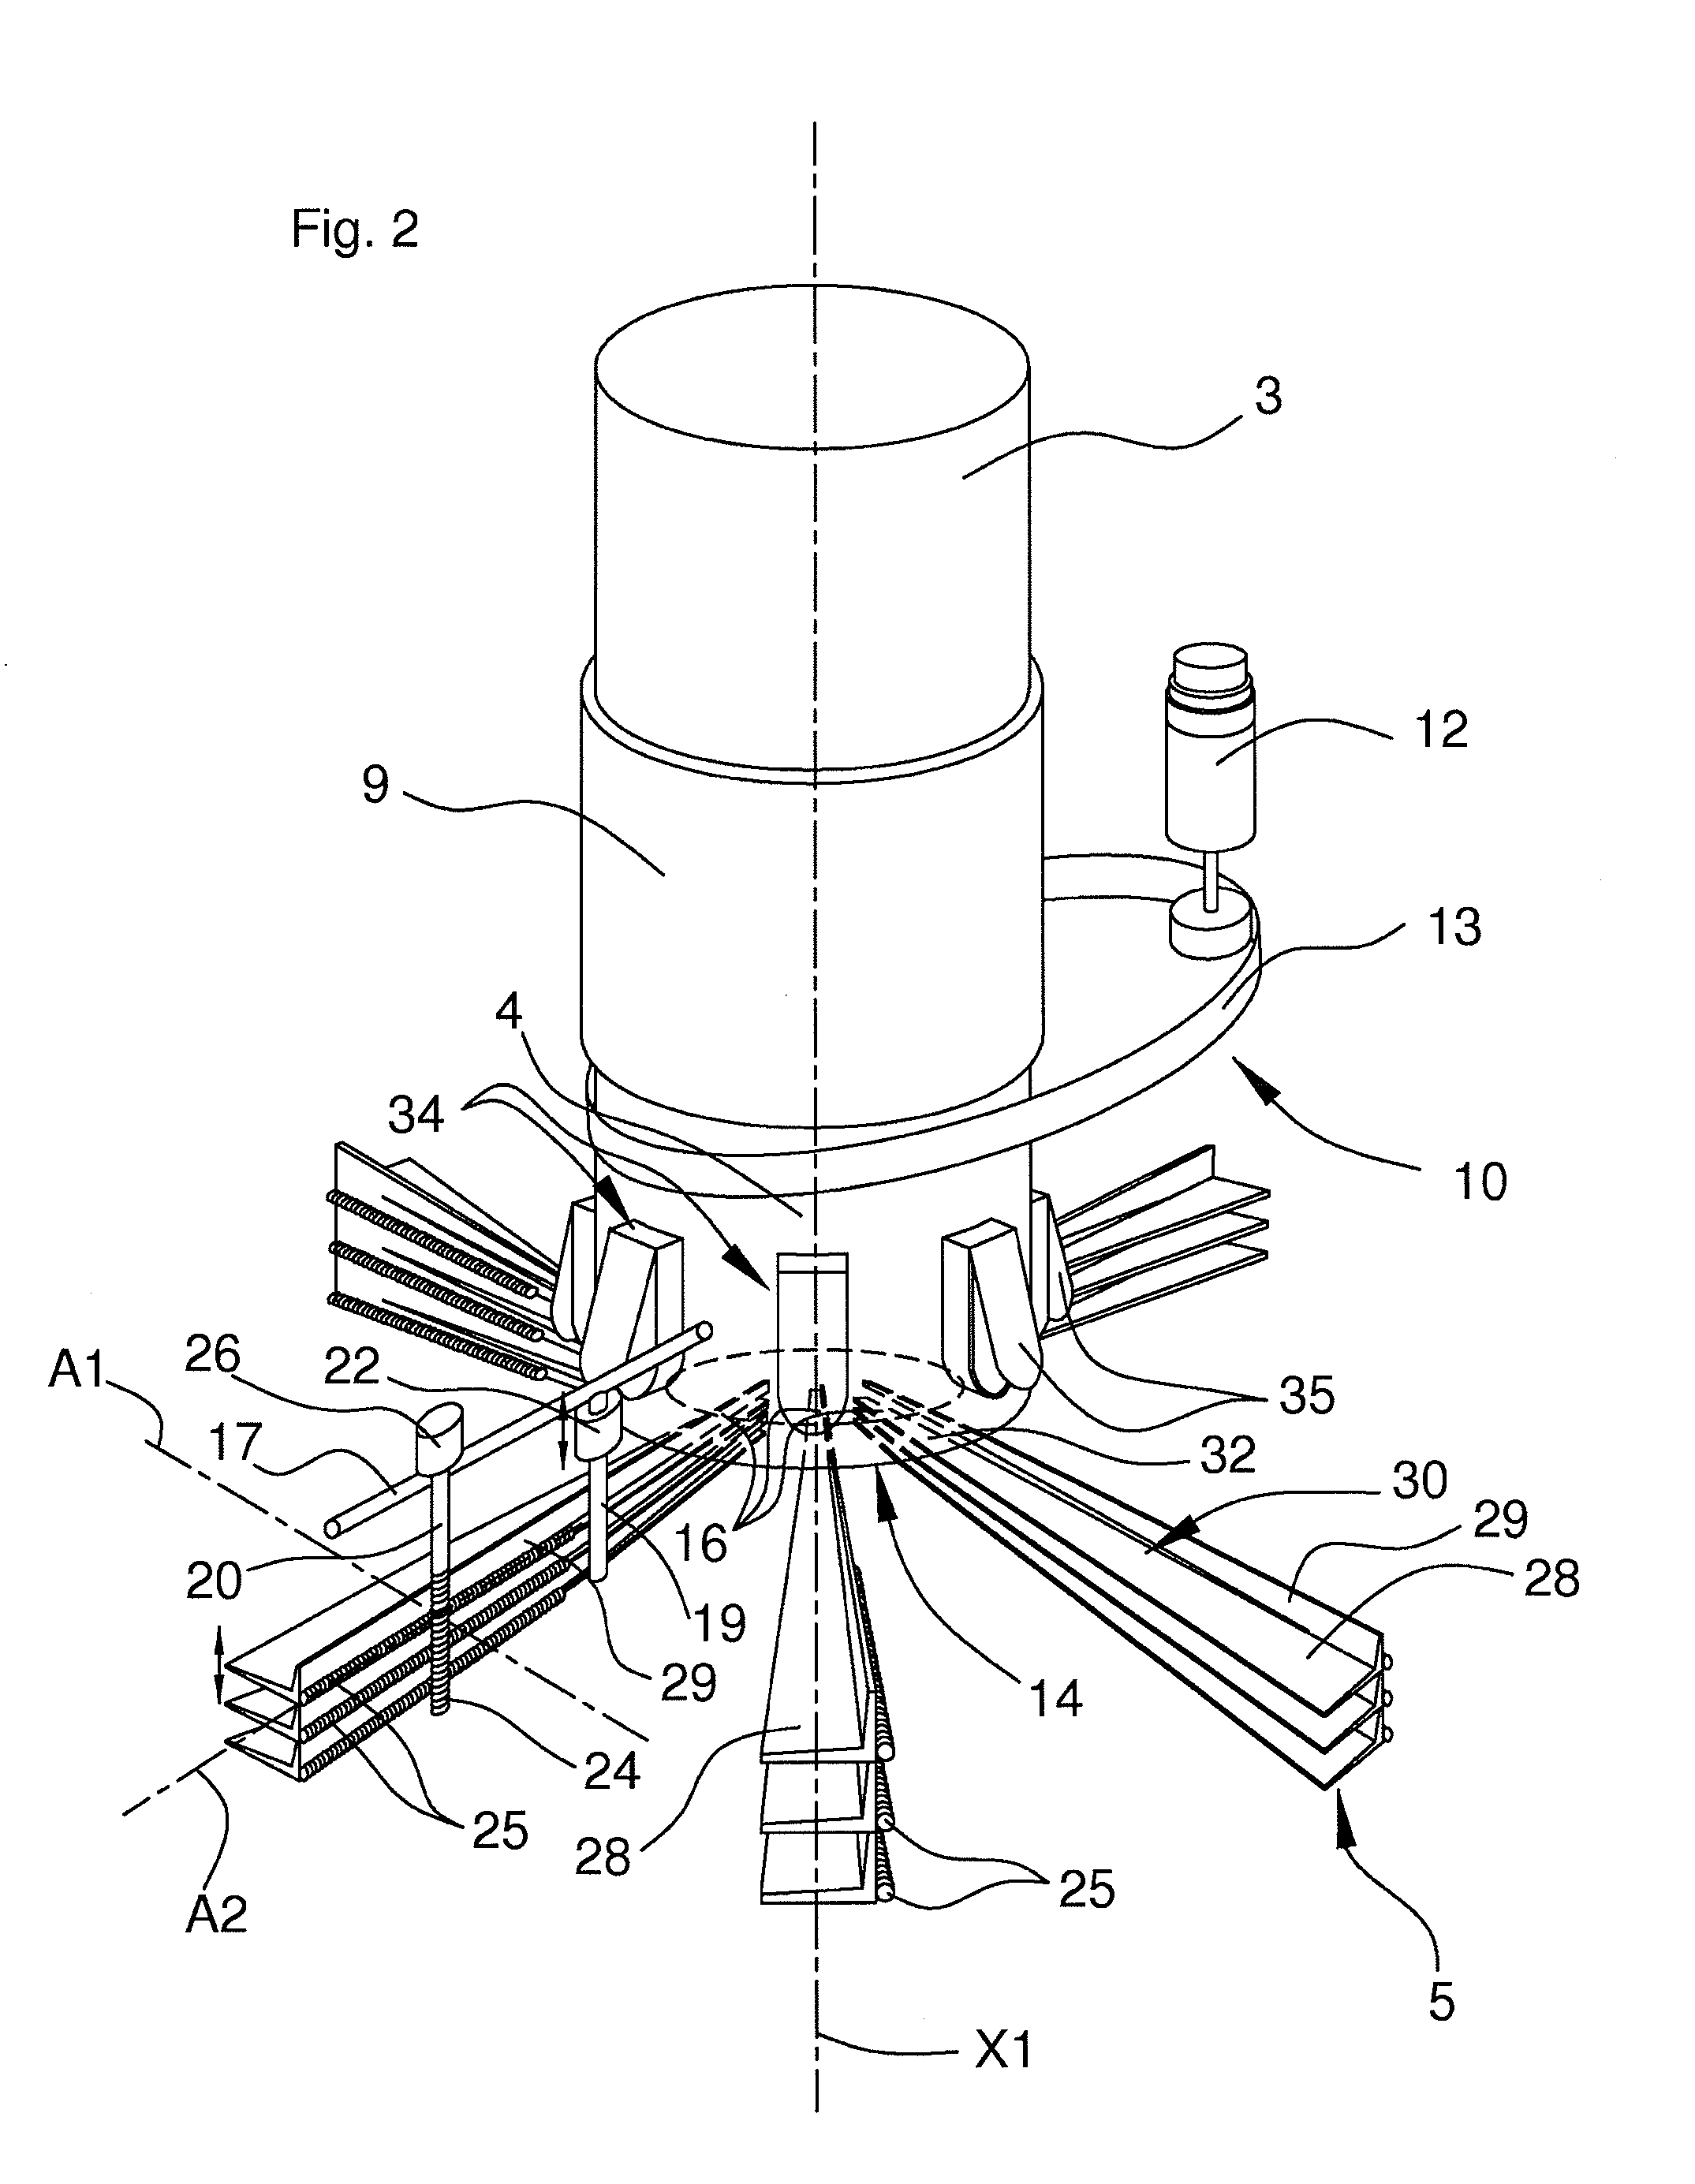 Device for densely loading a divided solid into a chamber